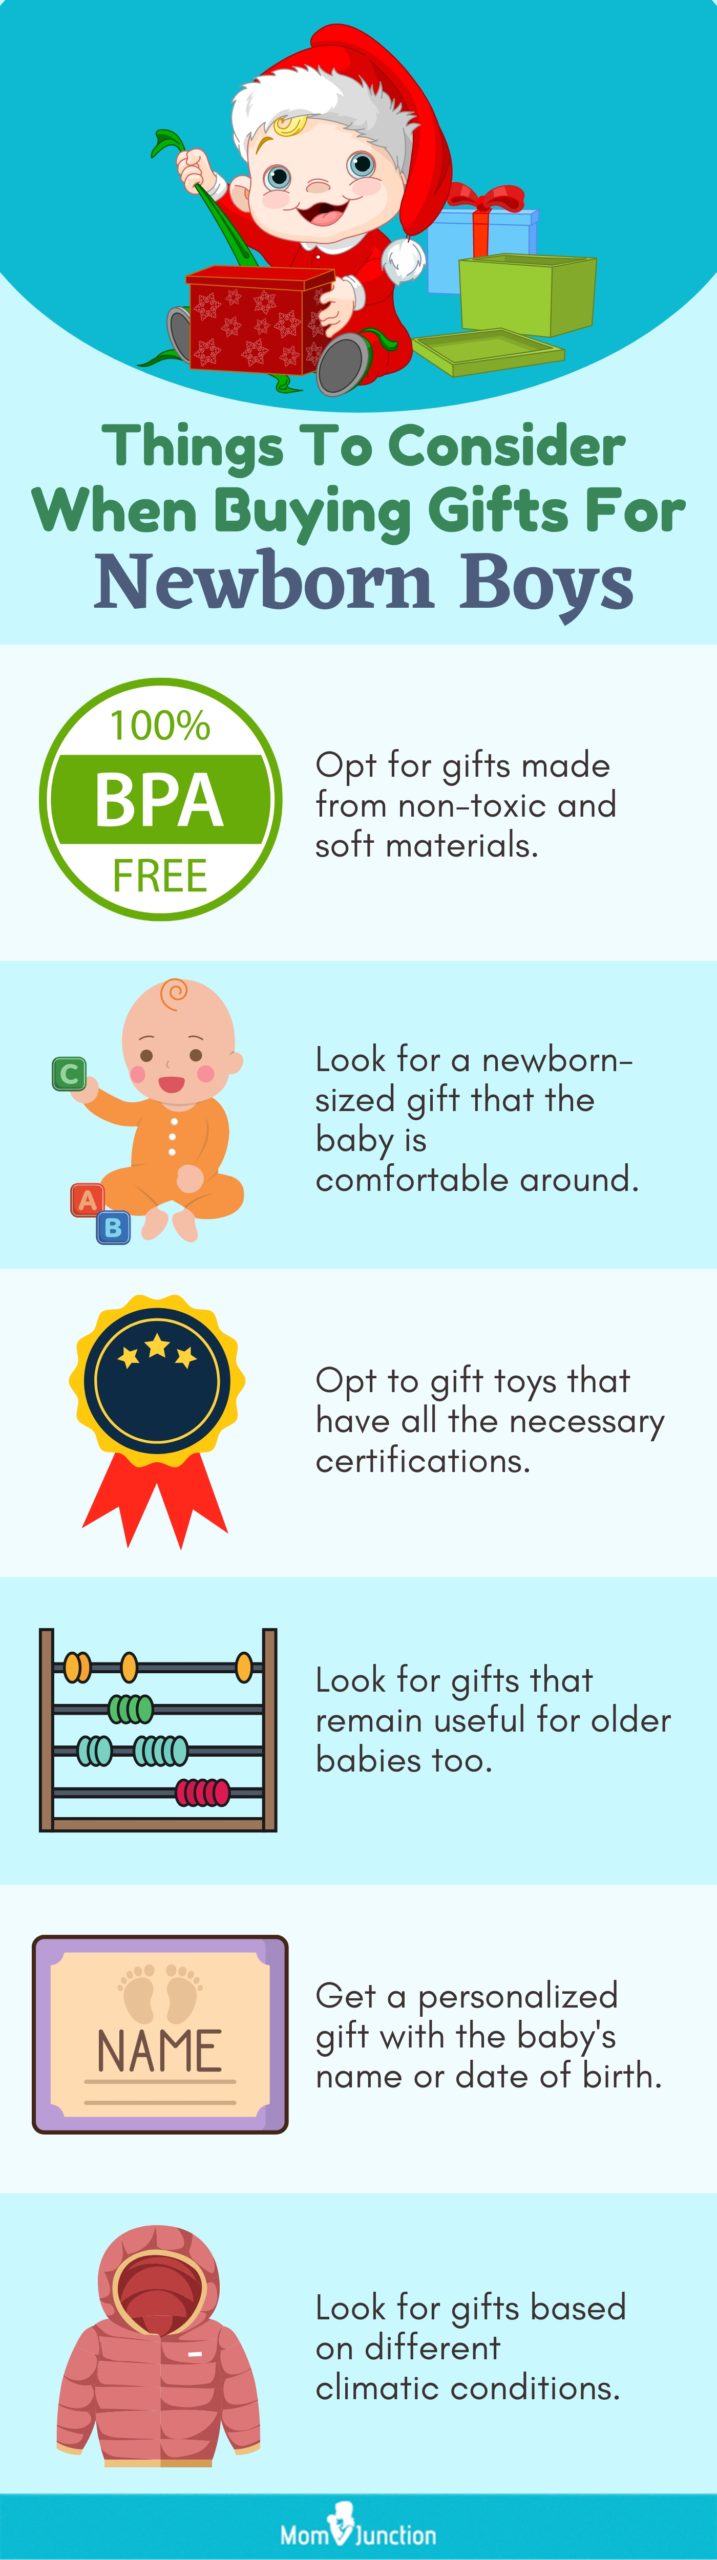 Things To Consider When Buying Gifts For Newborn Boys